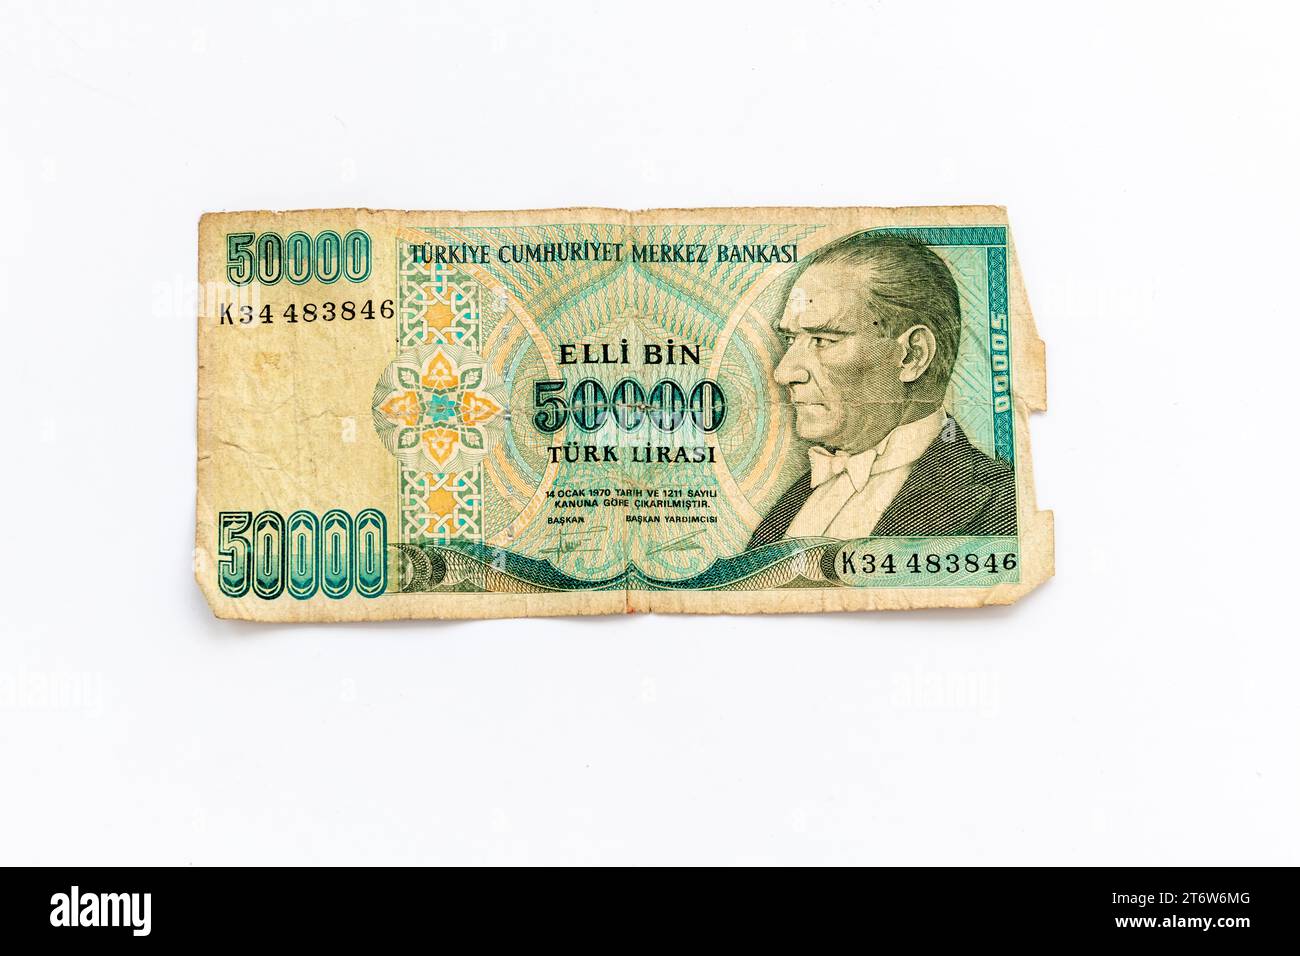 The front of an old Turkish fifty thousand lira bank note. Stock Photo